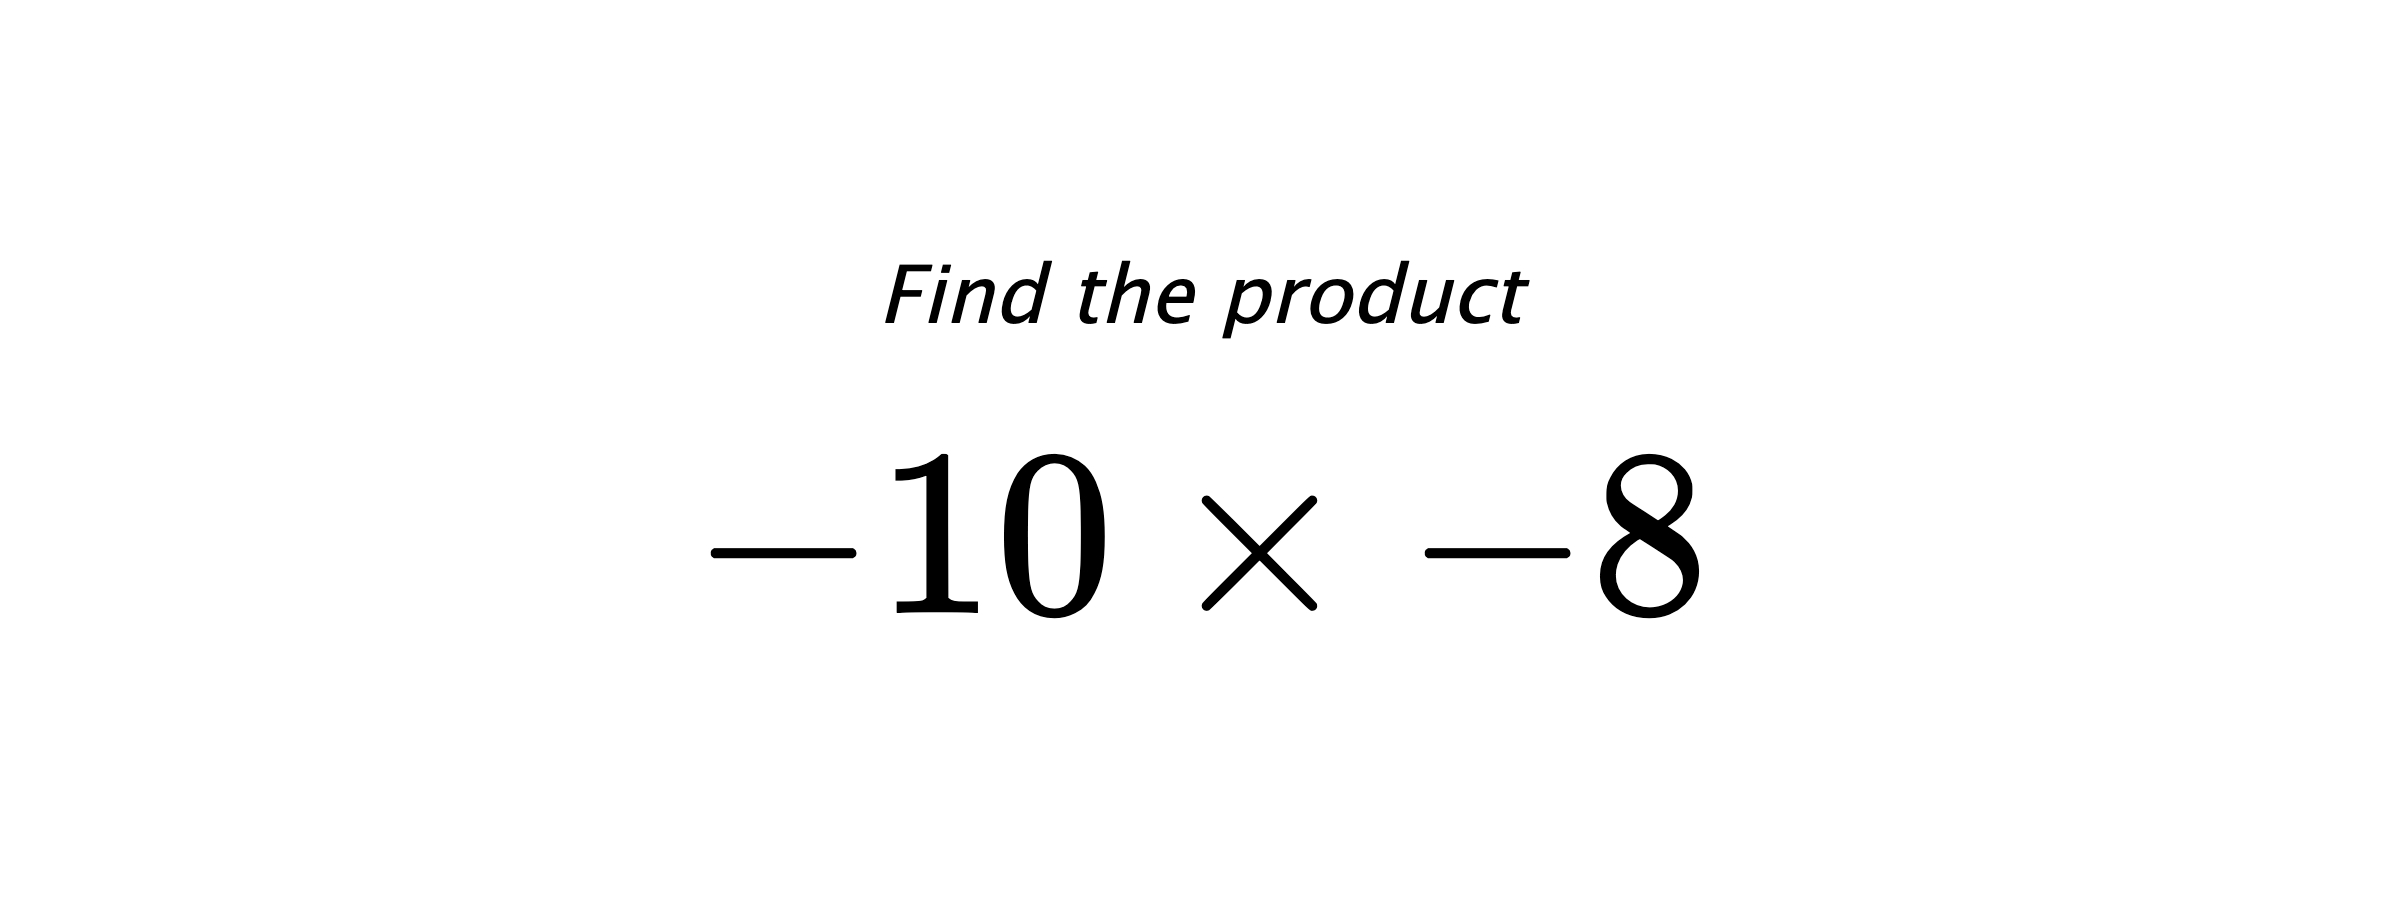 Find the product $ -10 \times -8 $